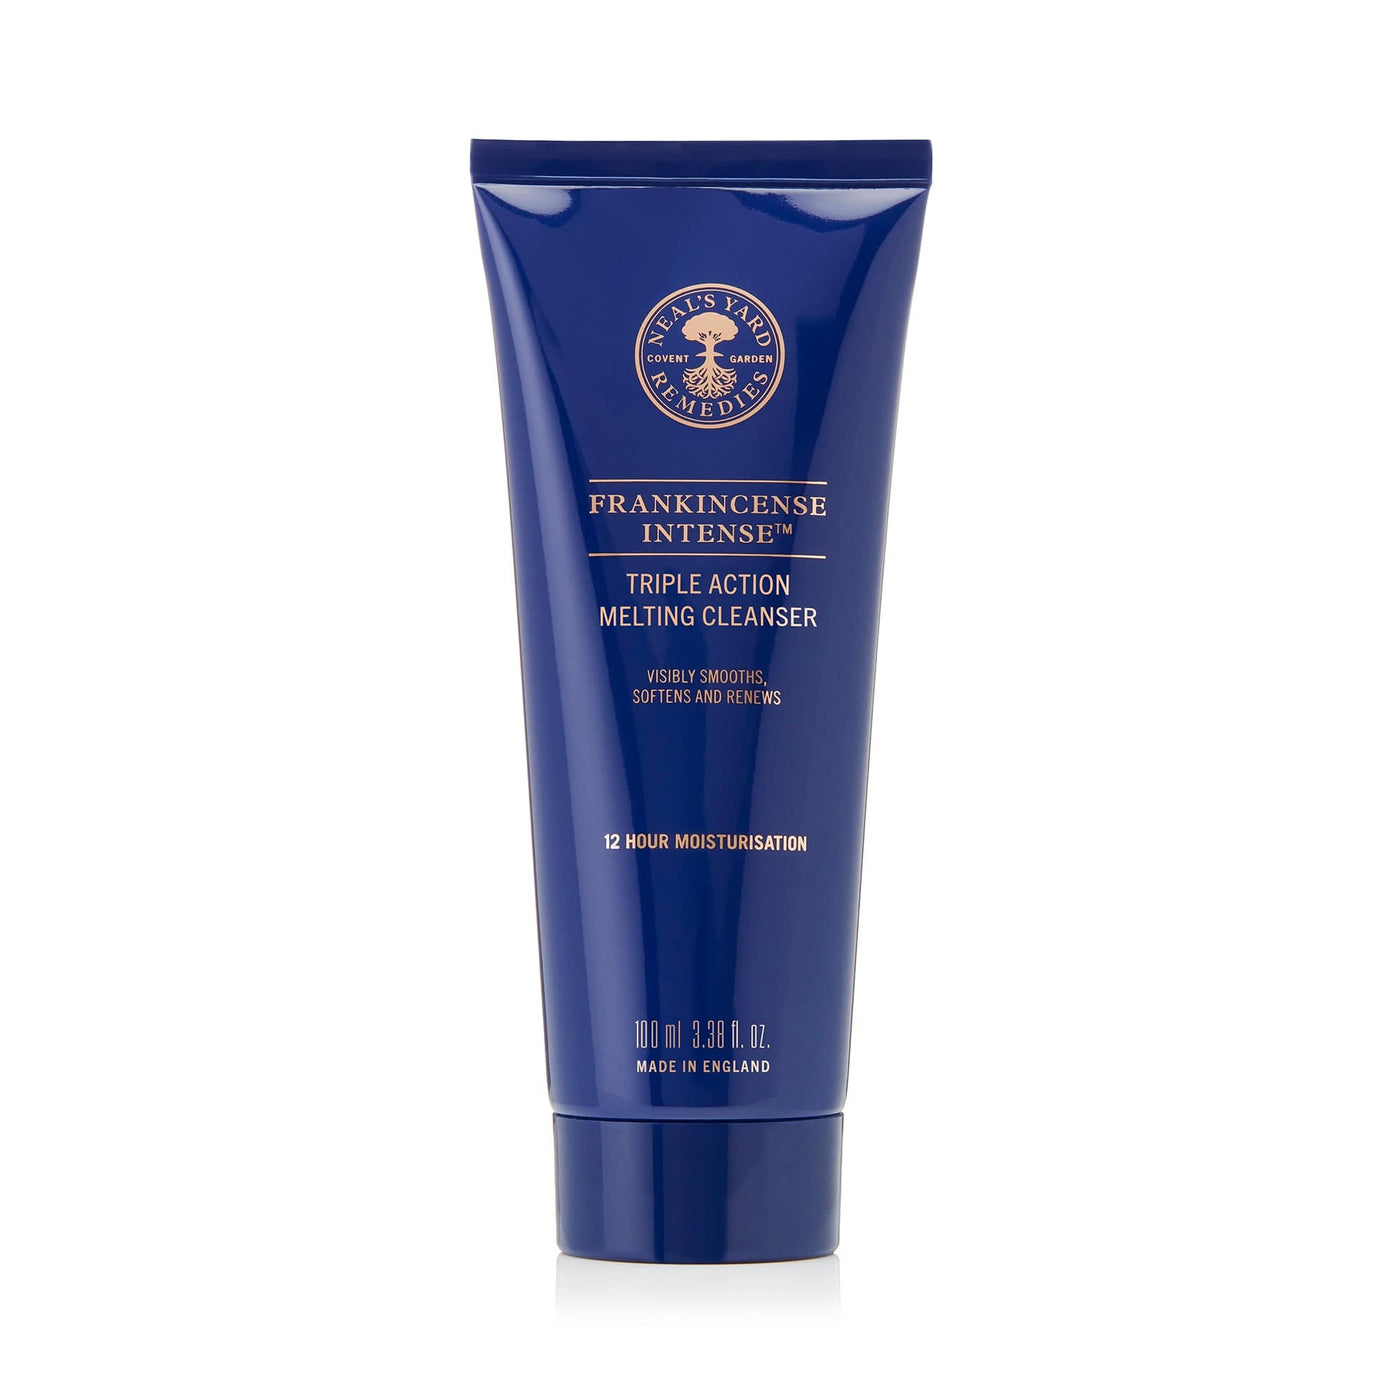 Neal's Yard Remedies Skincare Frankincense Intense Triple Action Melting Cleanser 3.38 fl.oz